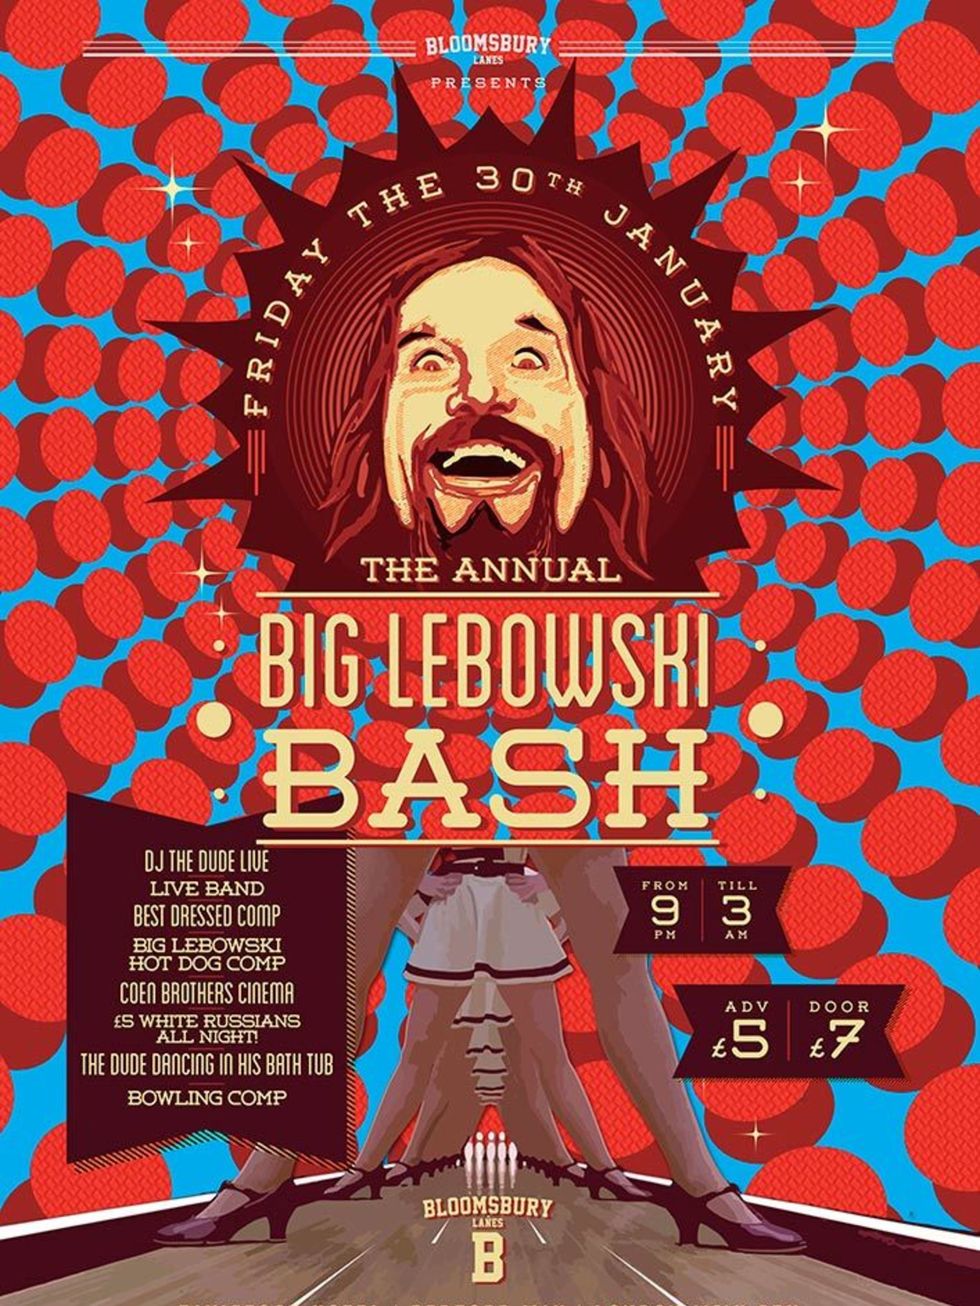 <p><strong>NIGHT OUT: The Big Lebowski Bash</strong><br />
<br />
<span style="line-height:1.6">The 4th annual tribute to The Dude is here and its all about bowling, hot dog eating contests and of course, drinking White Russians. Fancy dress is encourage